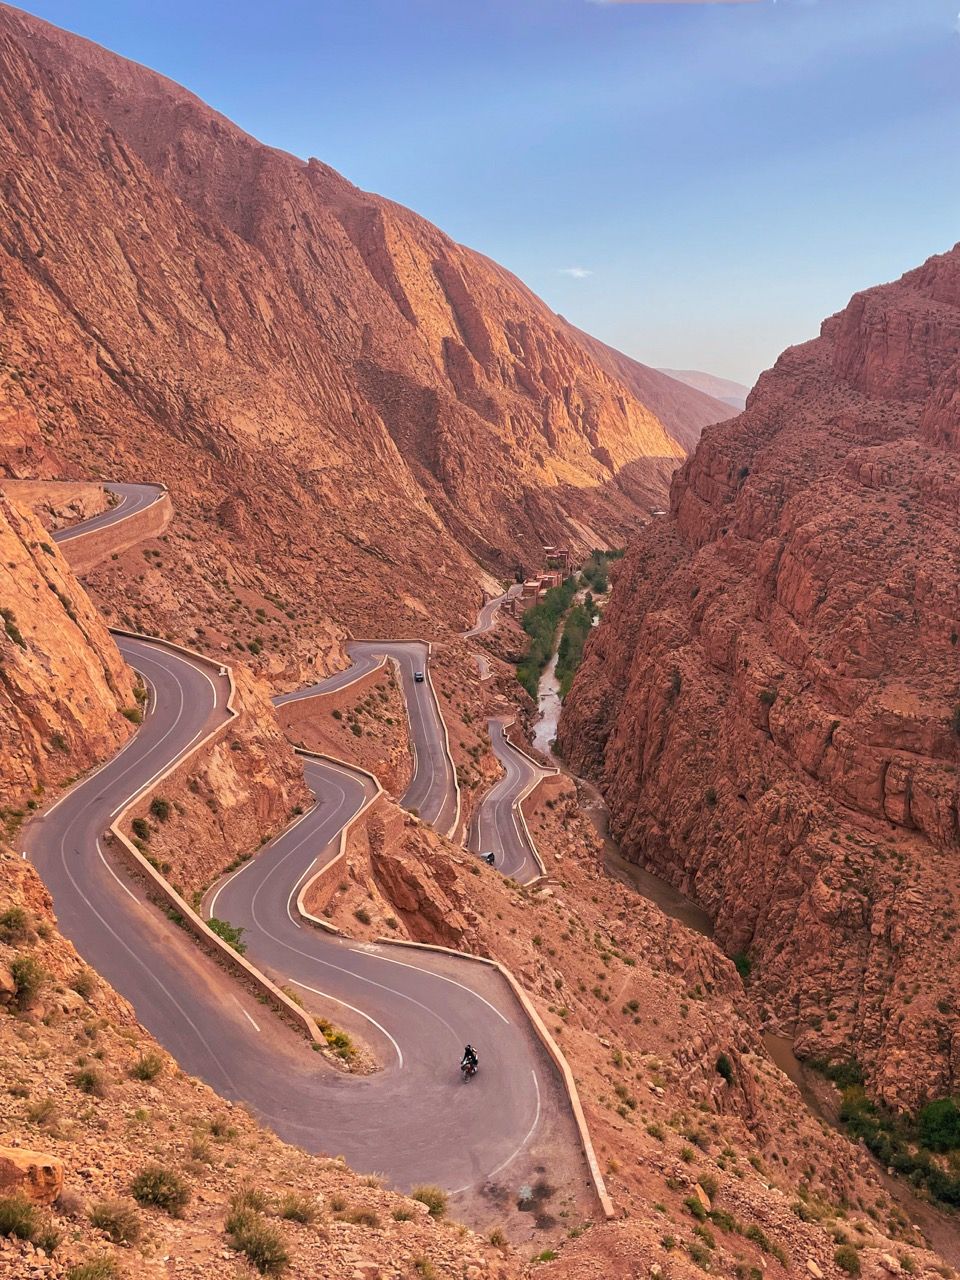 Exploring the Dades Gorges